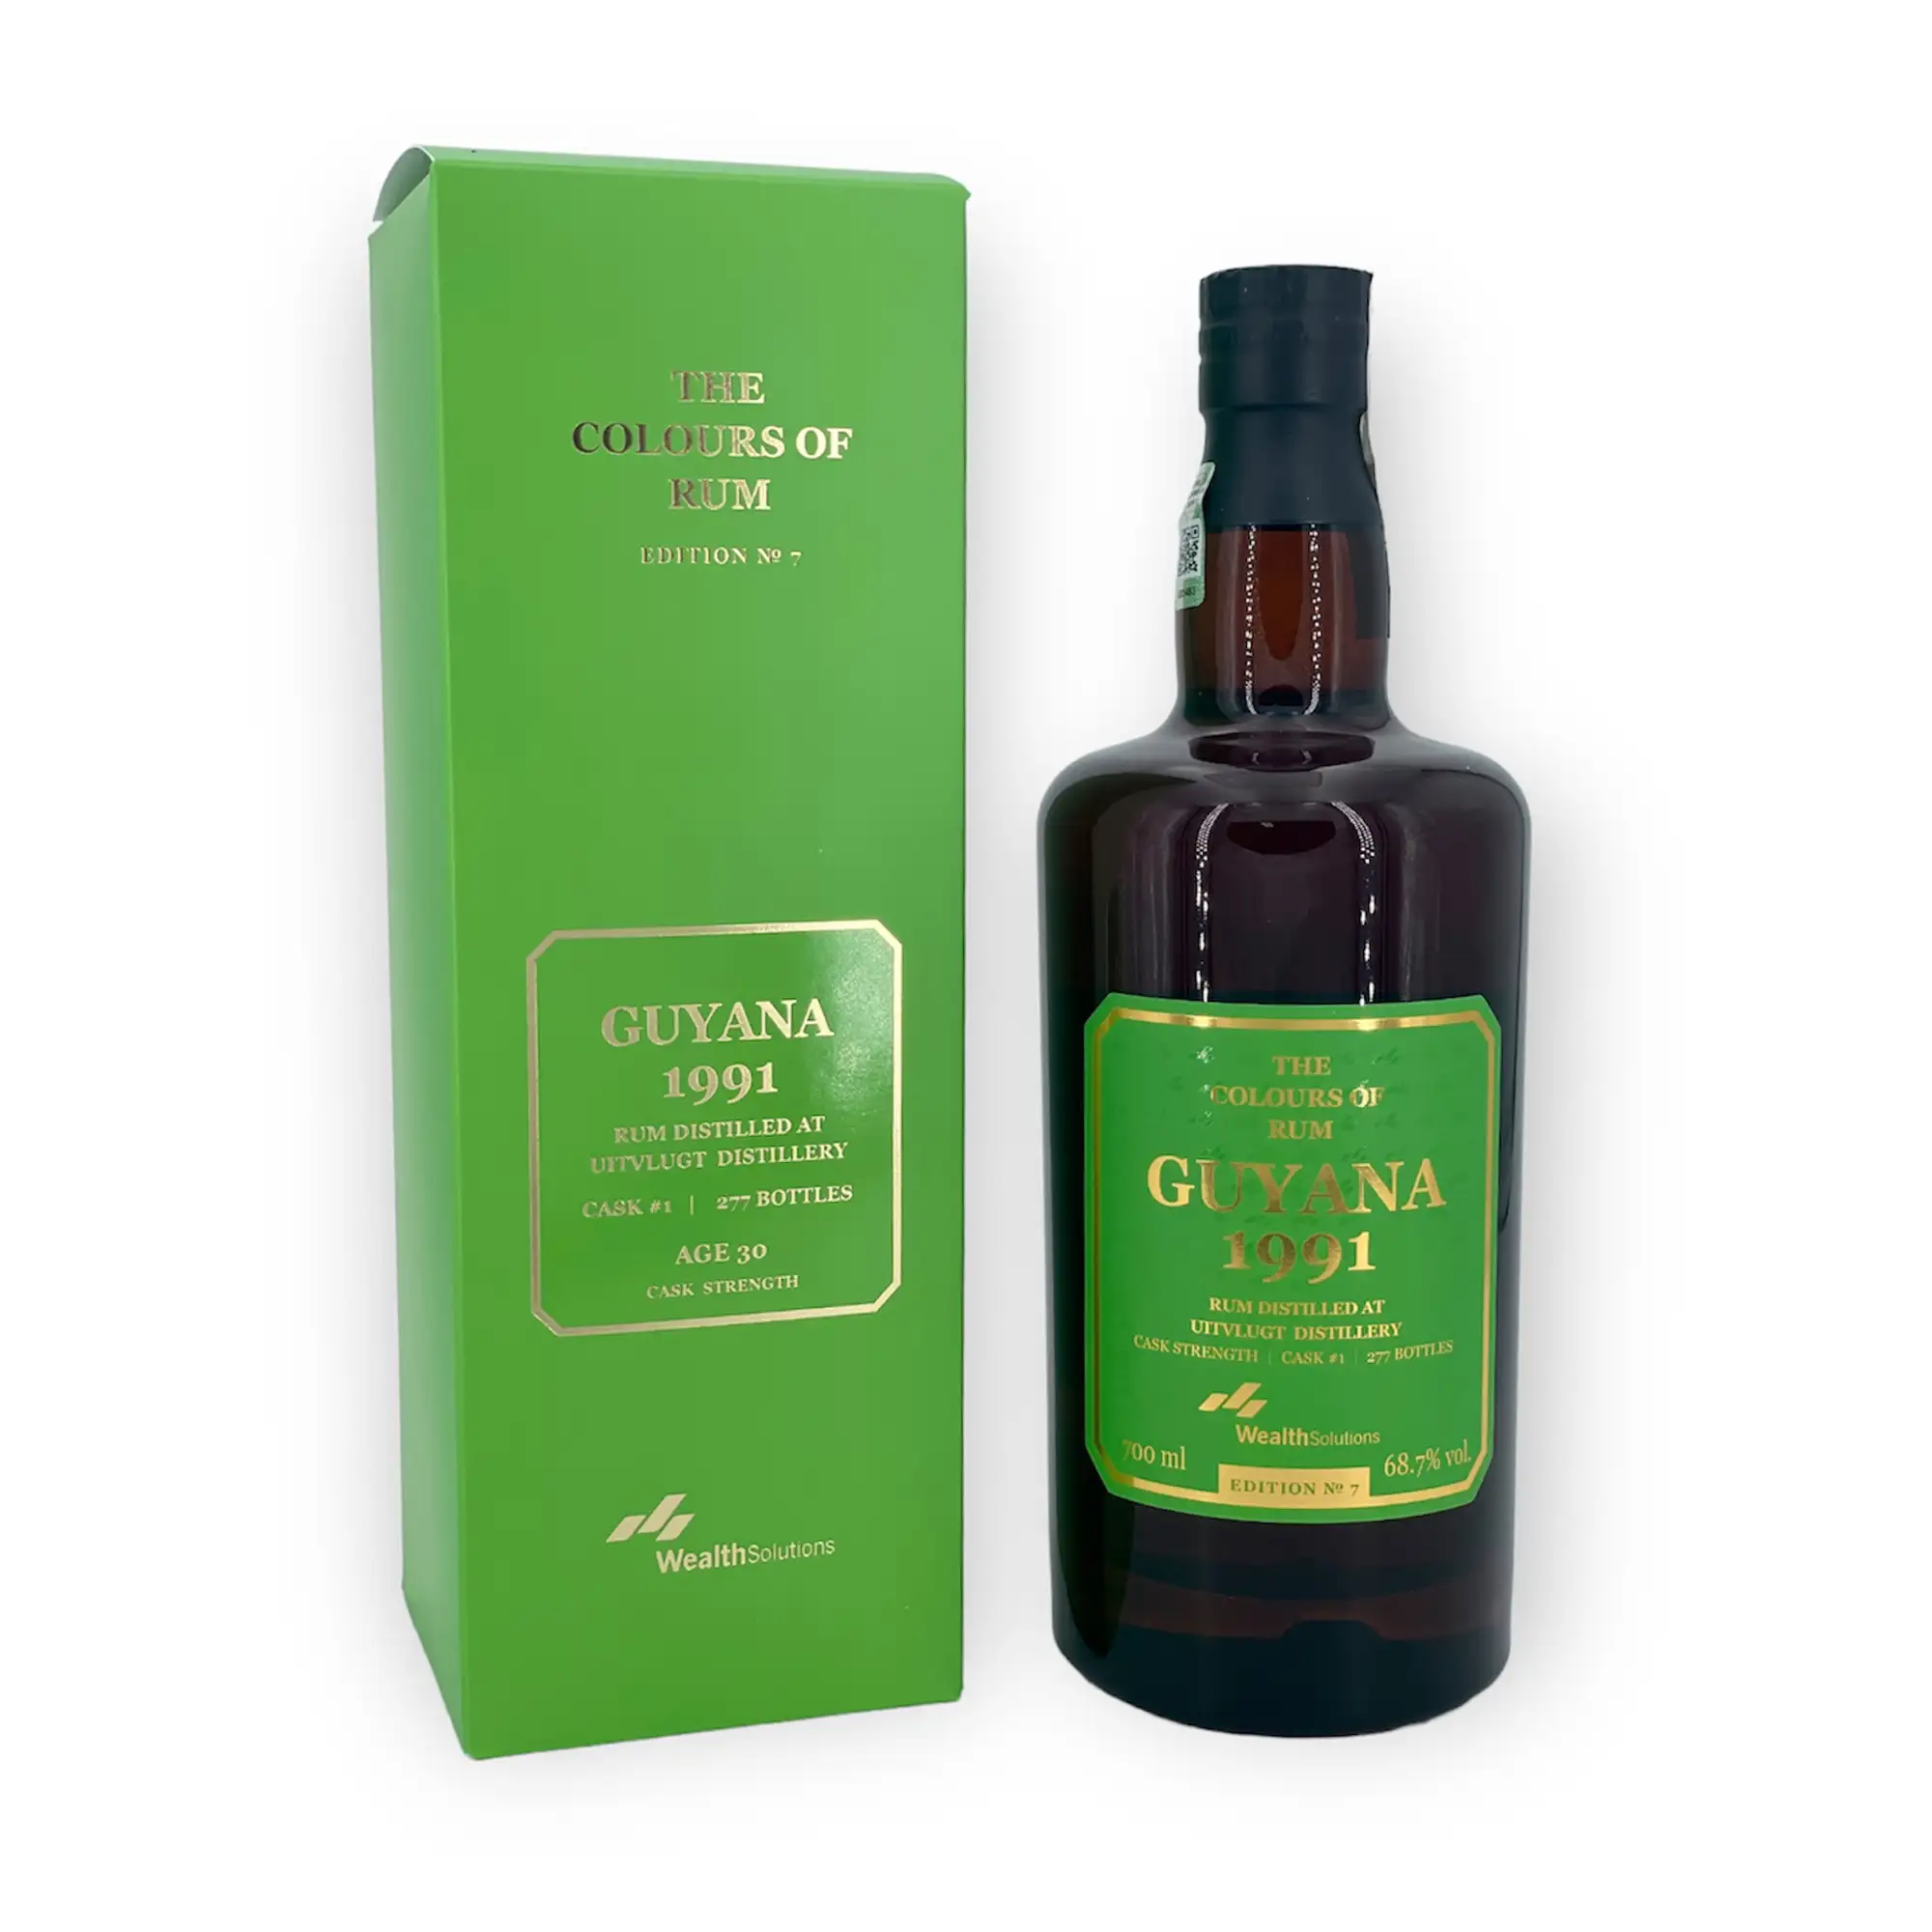 Image of the front of the bottle of the rum Guyana No. 7